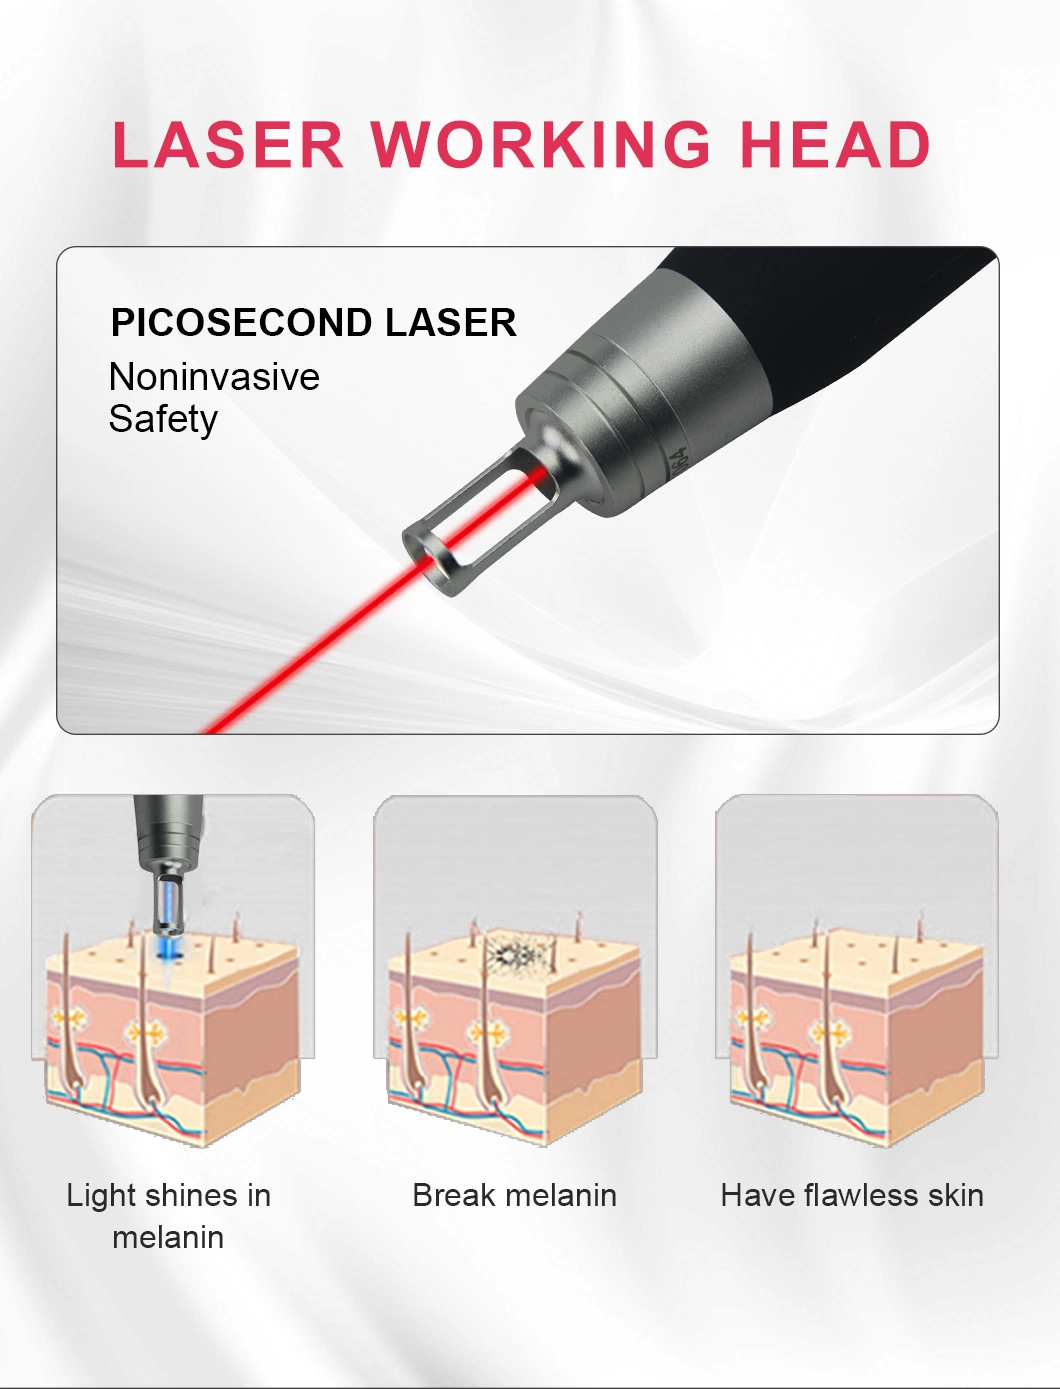 Improve Skin Texture Tattoo Removal Scars and Acne Marks Picosecond Laser Beauty Equipment